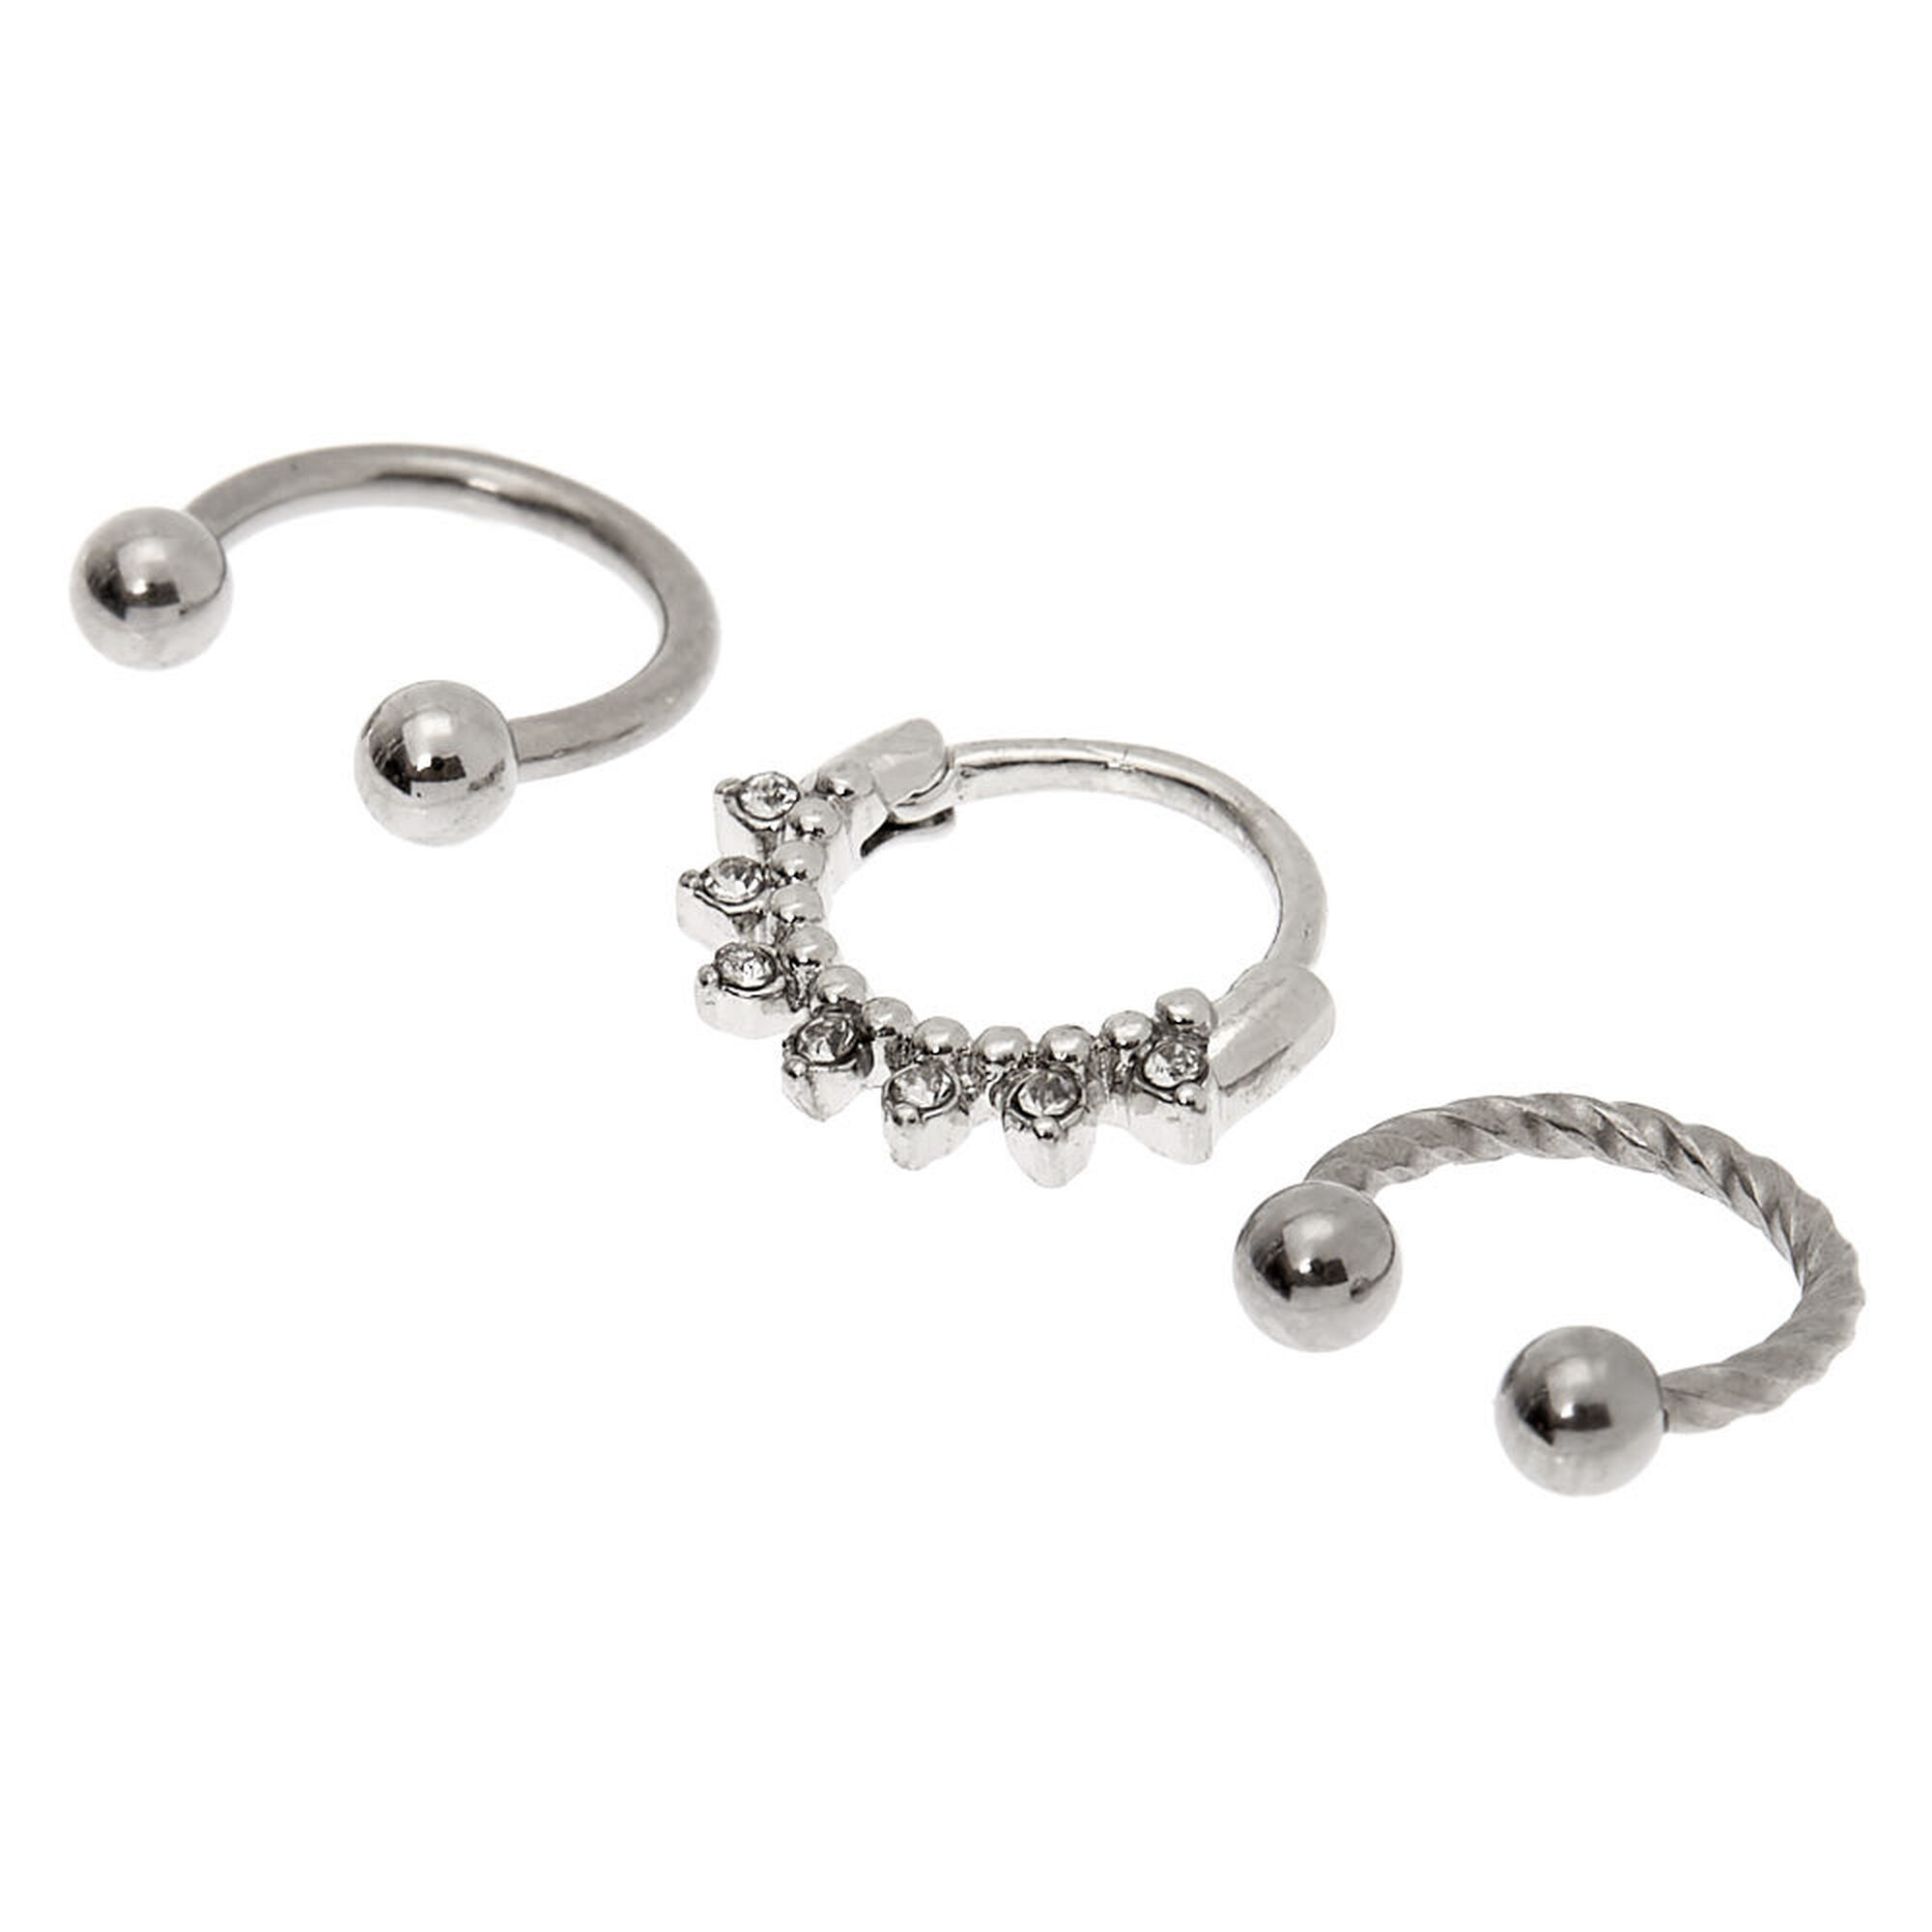 View Claires Tone Twisted Crystal Cartilage Hoop Earrings 3 Pack Silver information